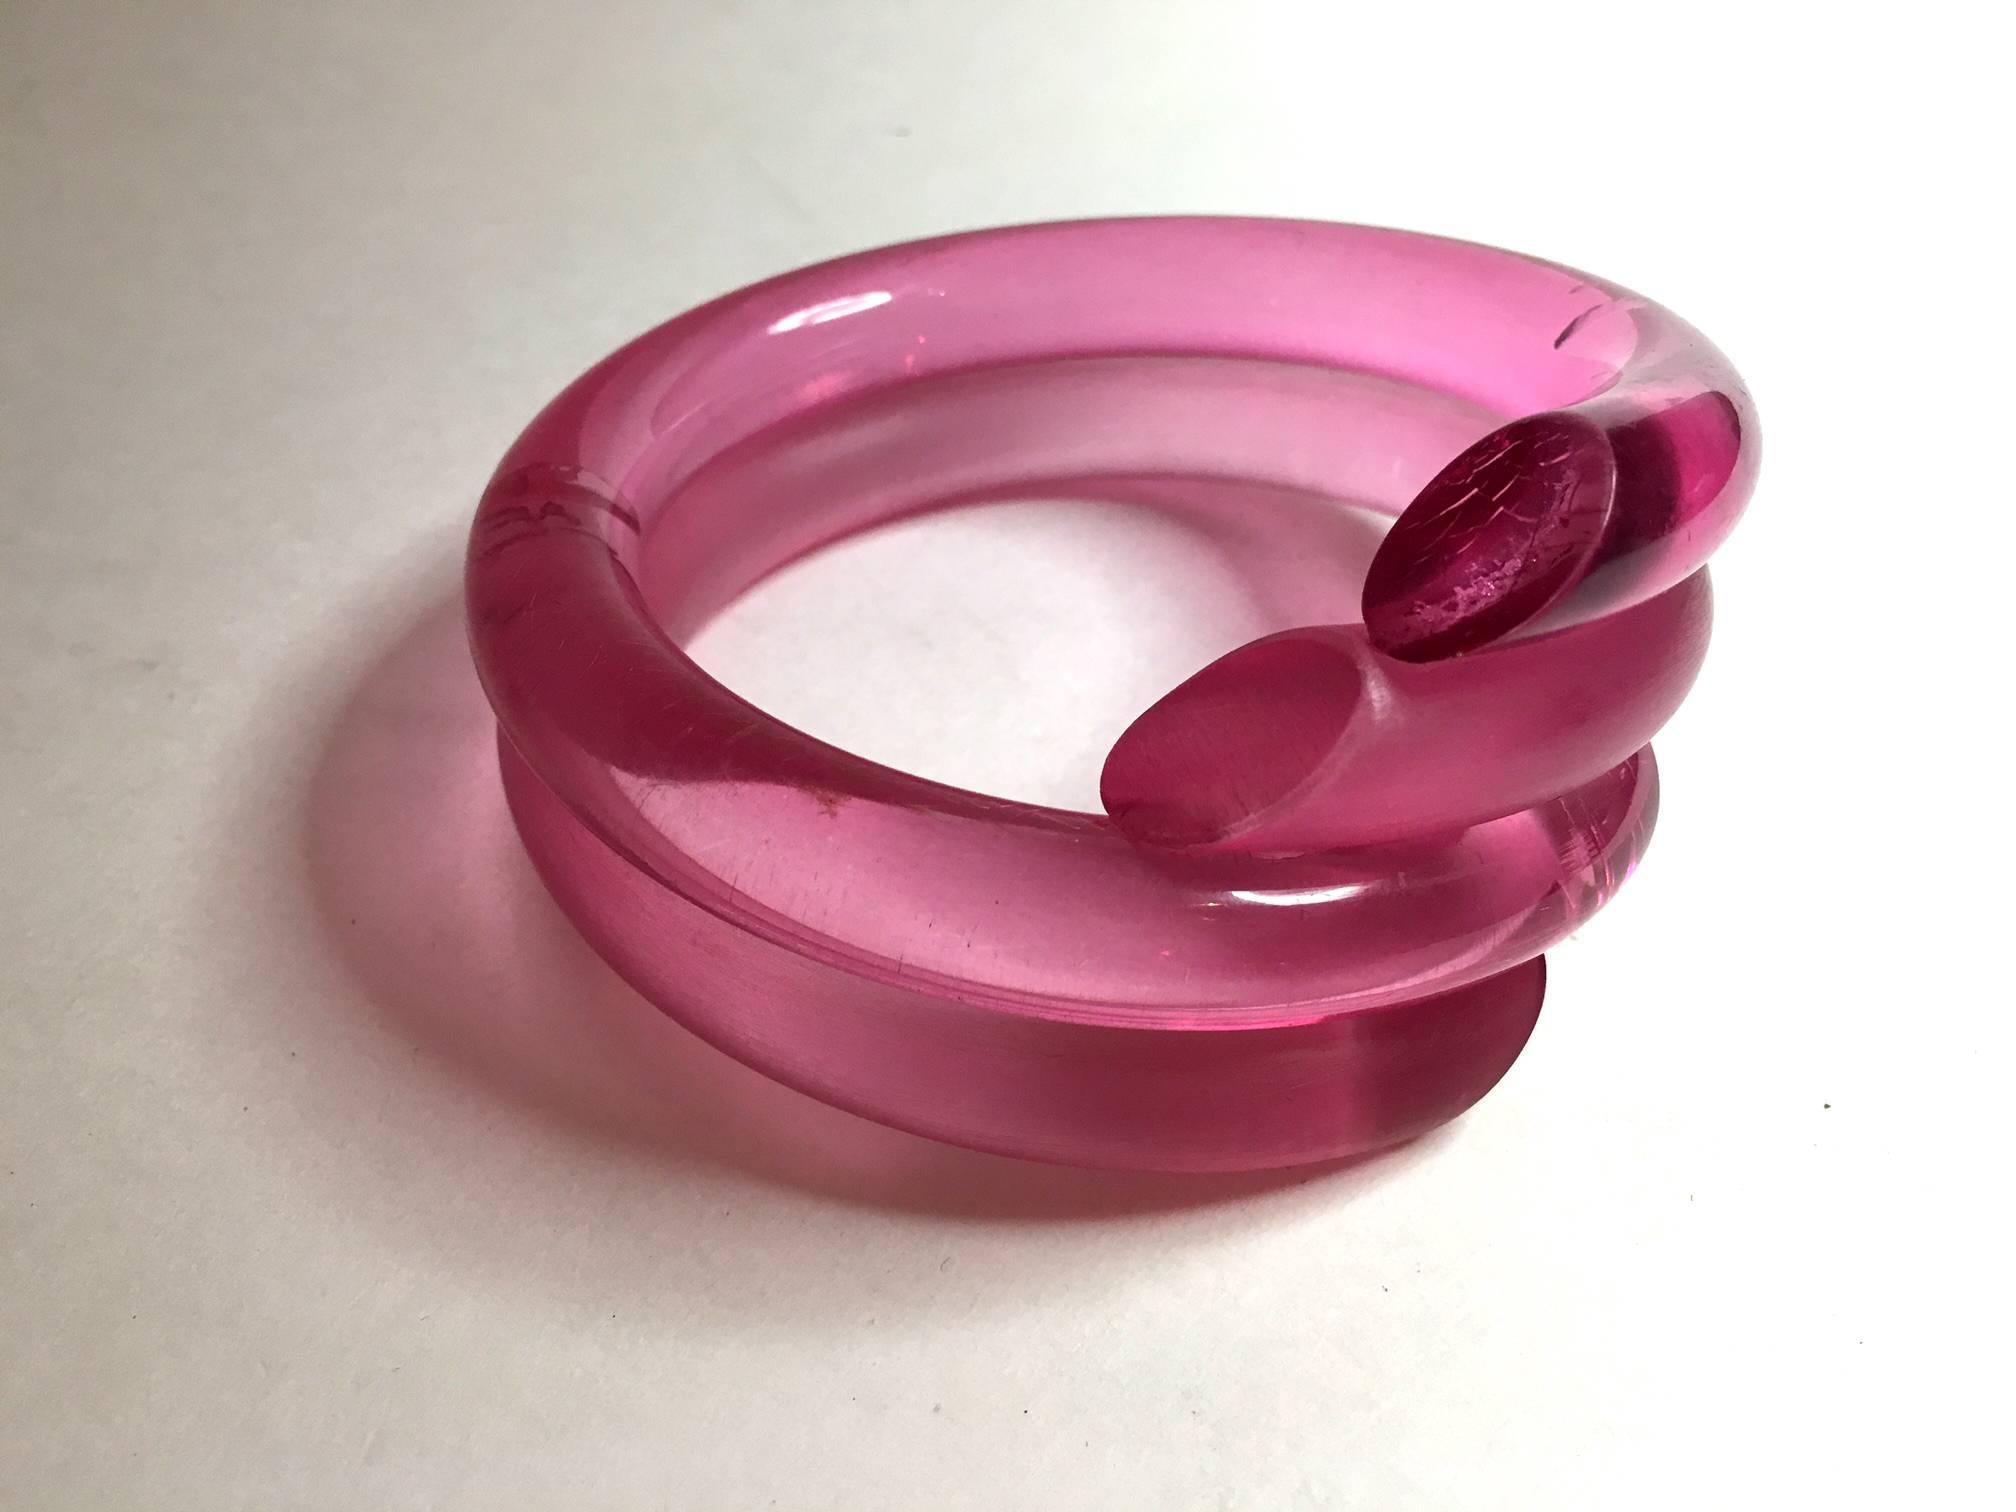 1980s JUDITH HENDLER Acrylic Coiled Bangle Bracelet Frost and Clear Combination In Good Condition For Sale In Palm Springs, CA